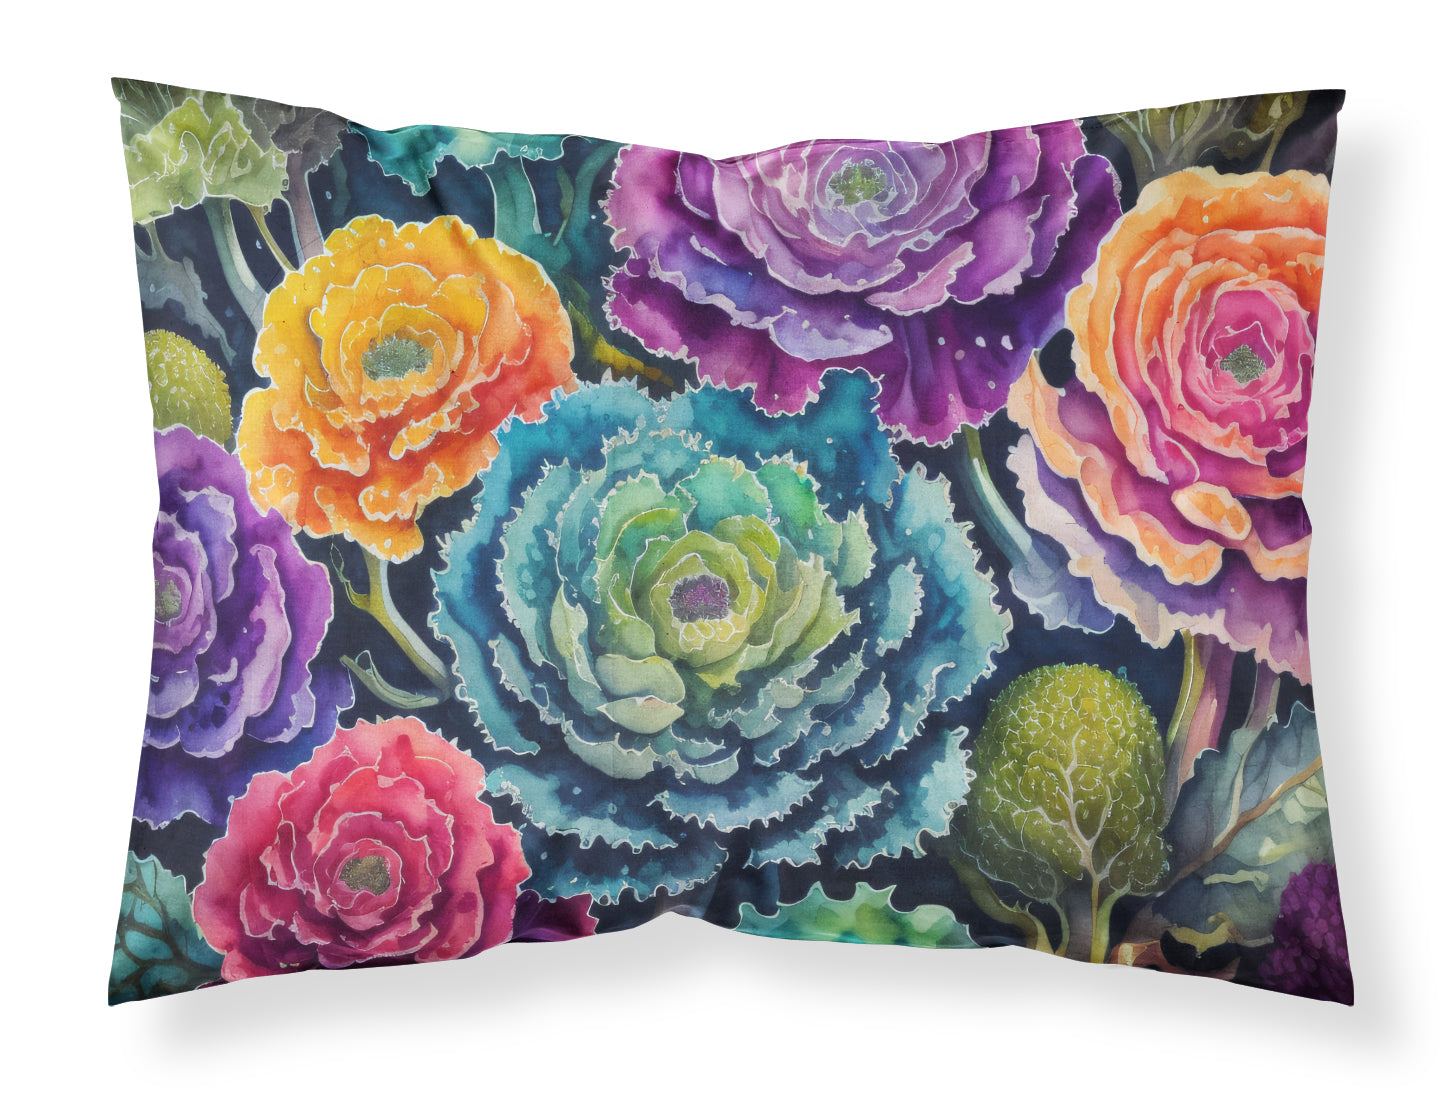 Buy this Ornamental Kale in Color Fabric Standard Pillowcase